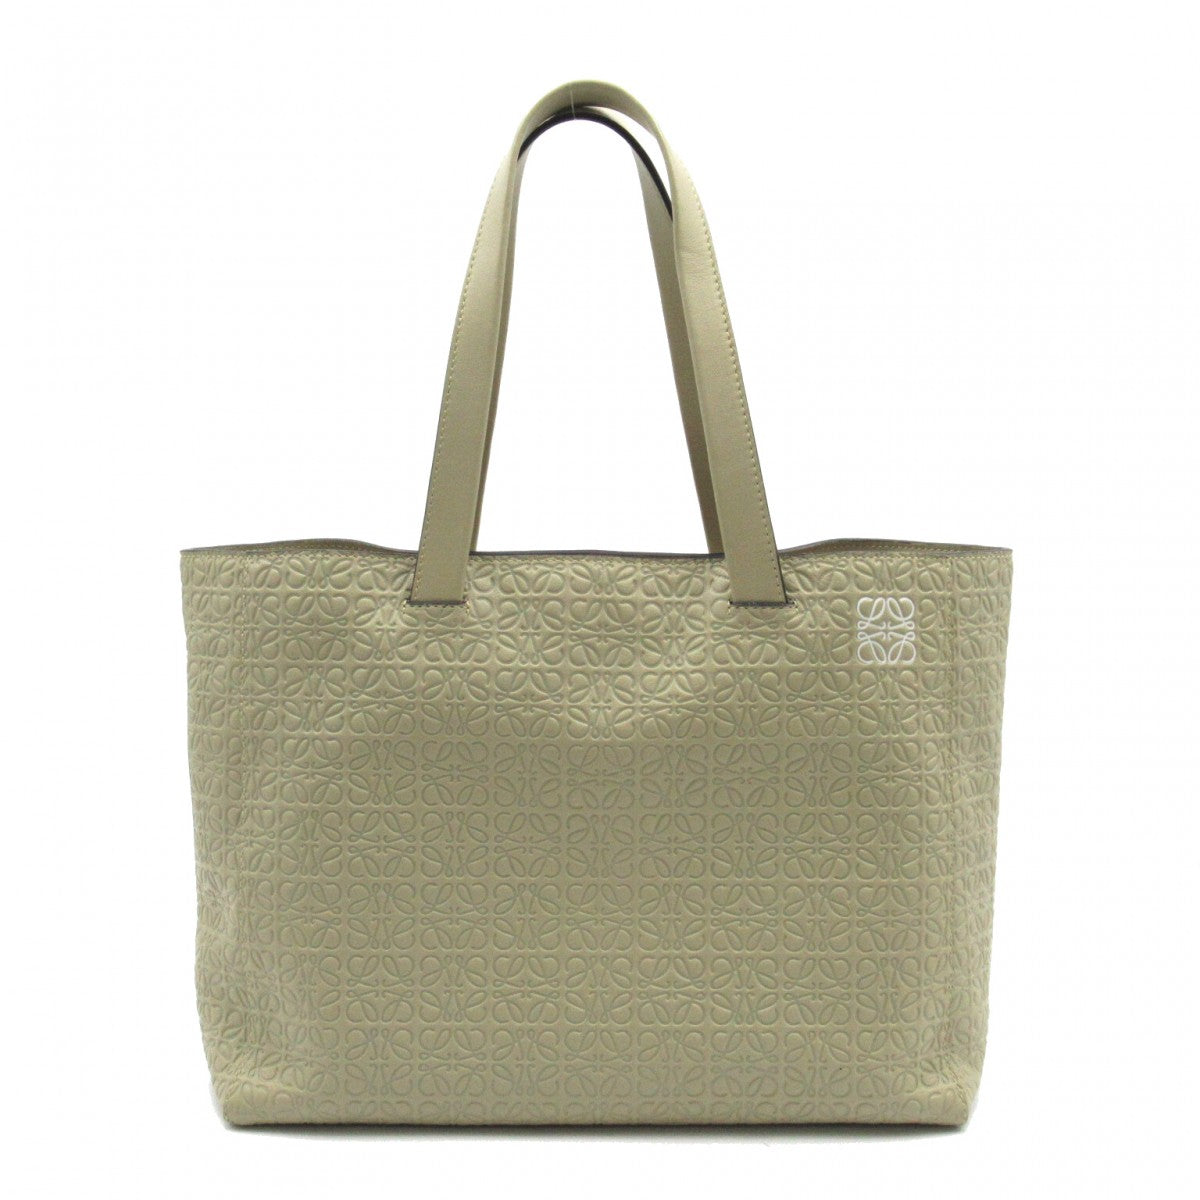 Anagram Embossed Leather Shopper Tote